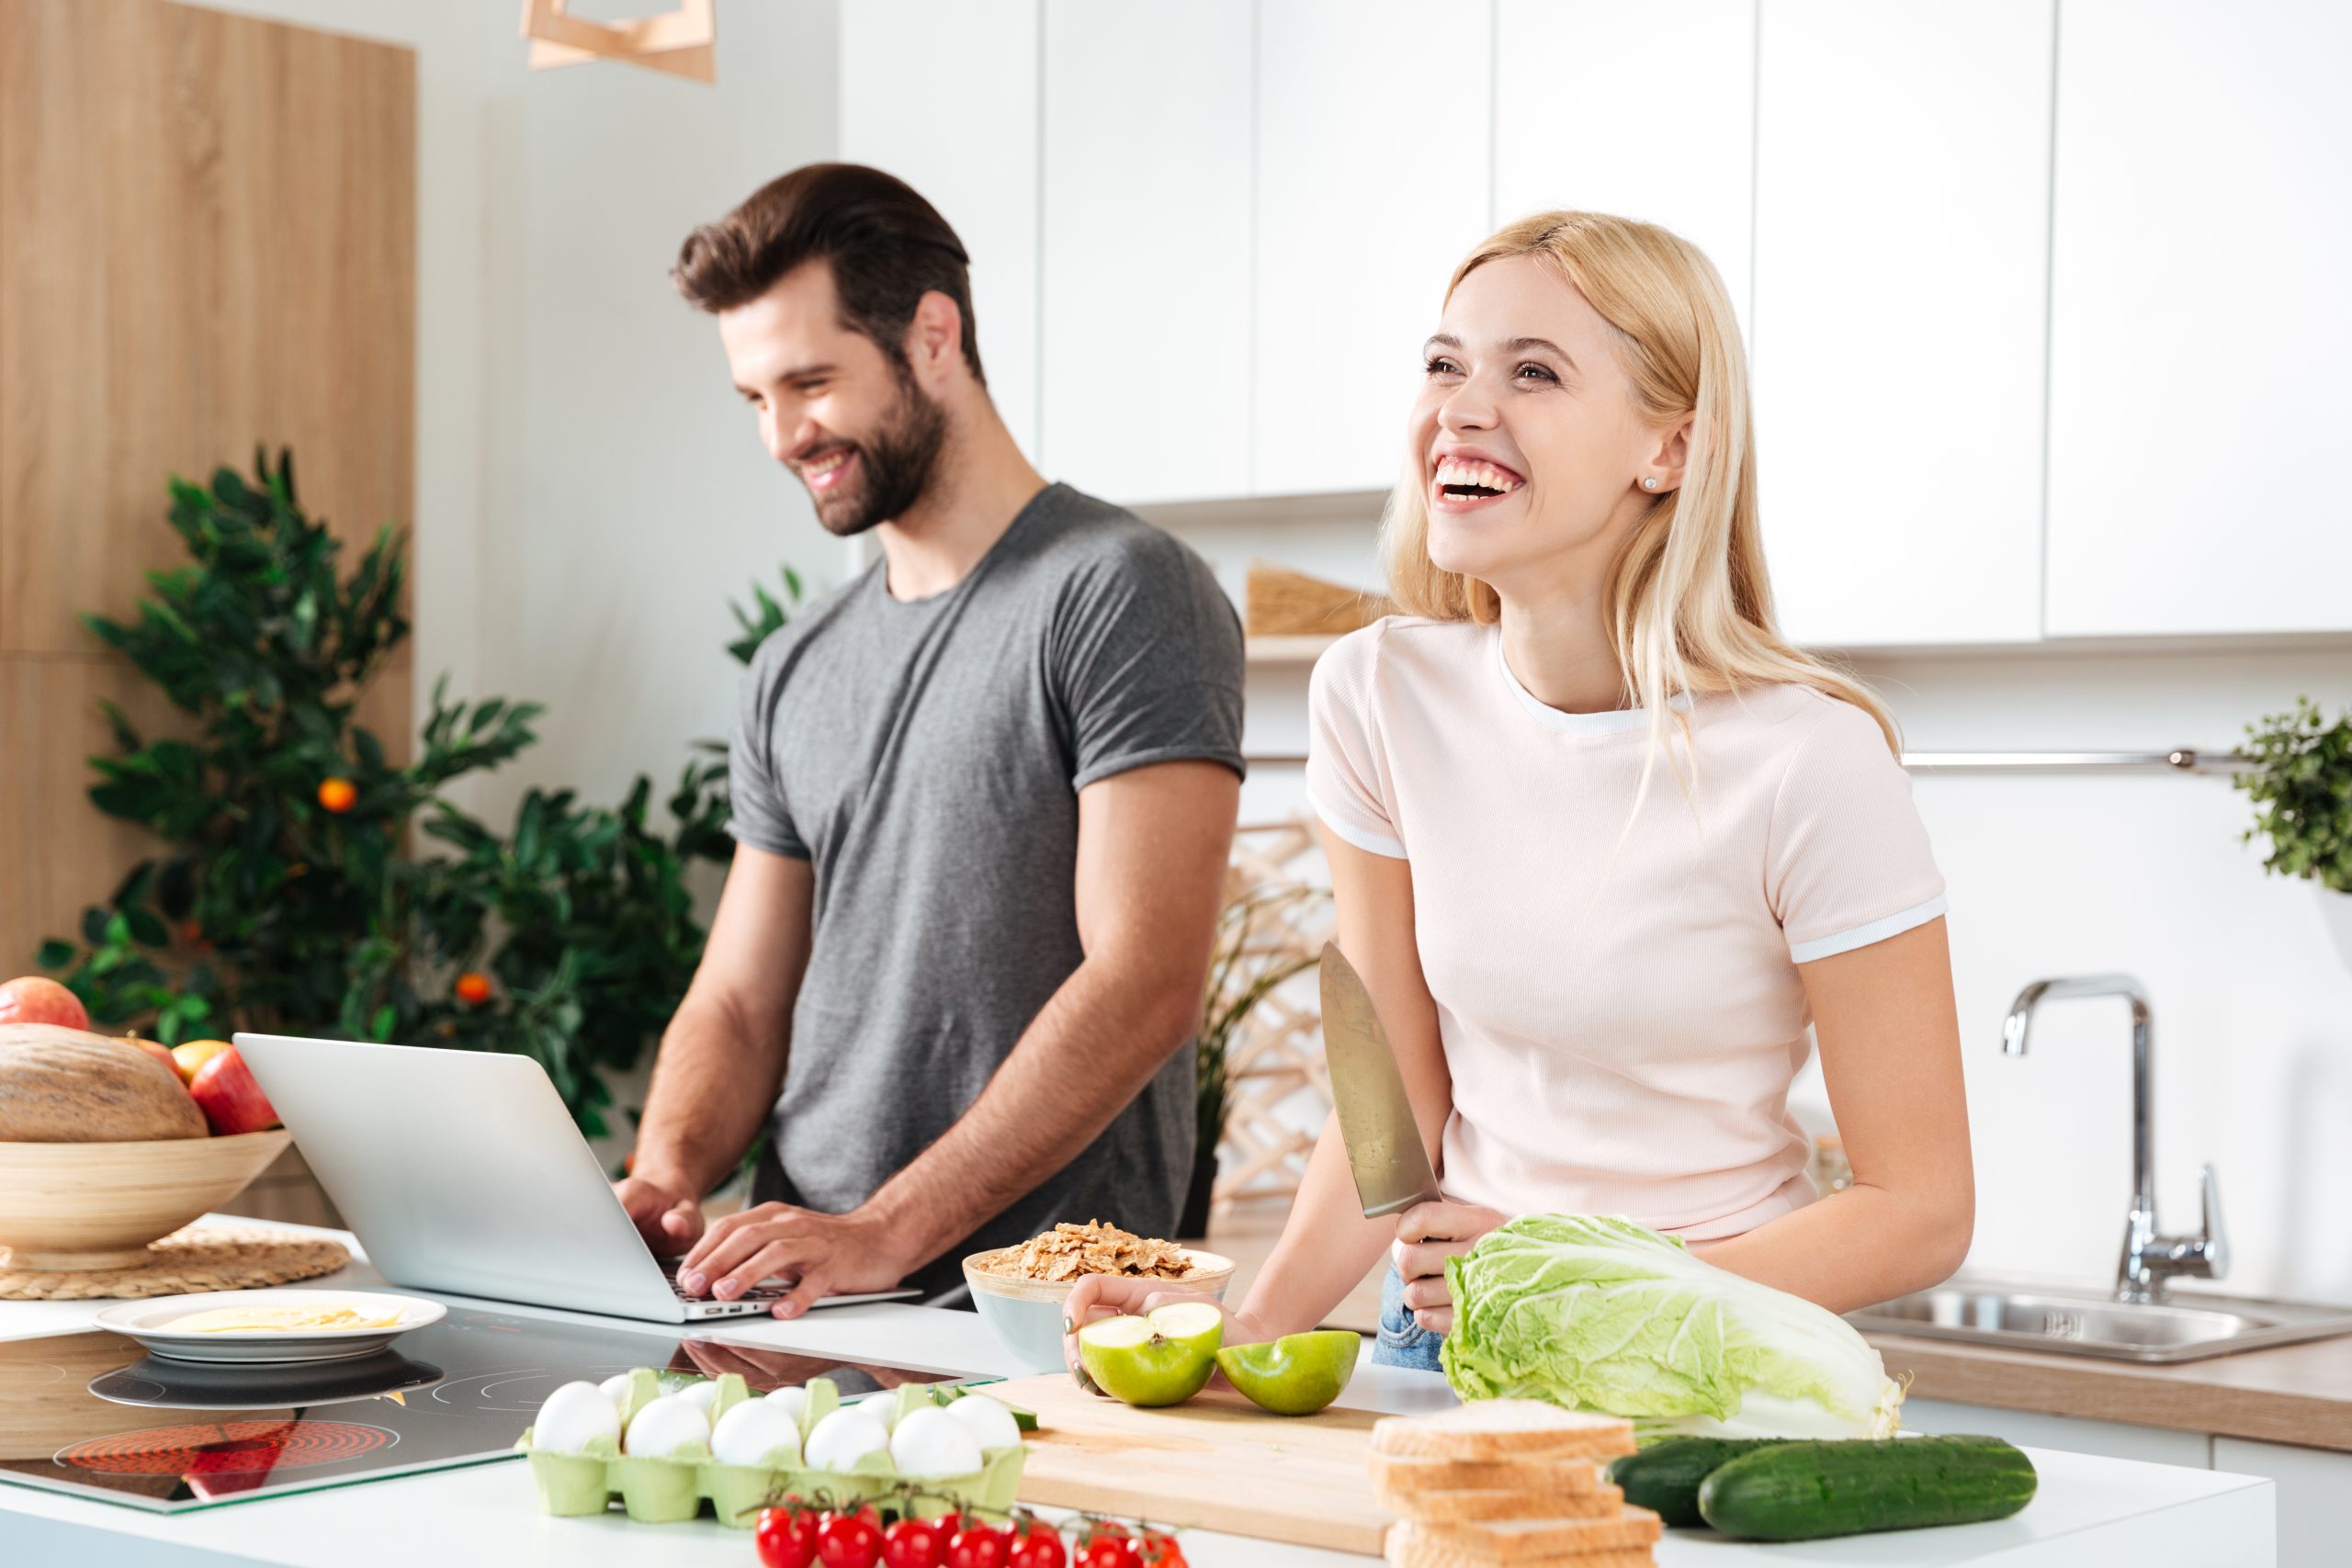 Smiling couple using notebook to cook in their kitchen and laughing